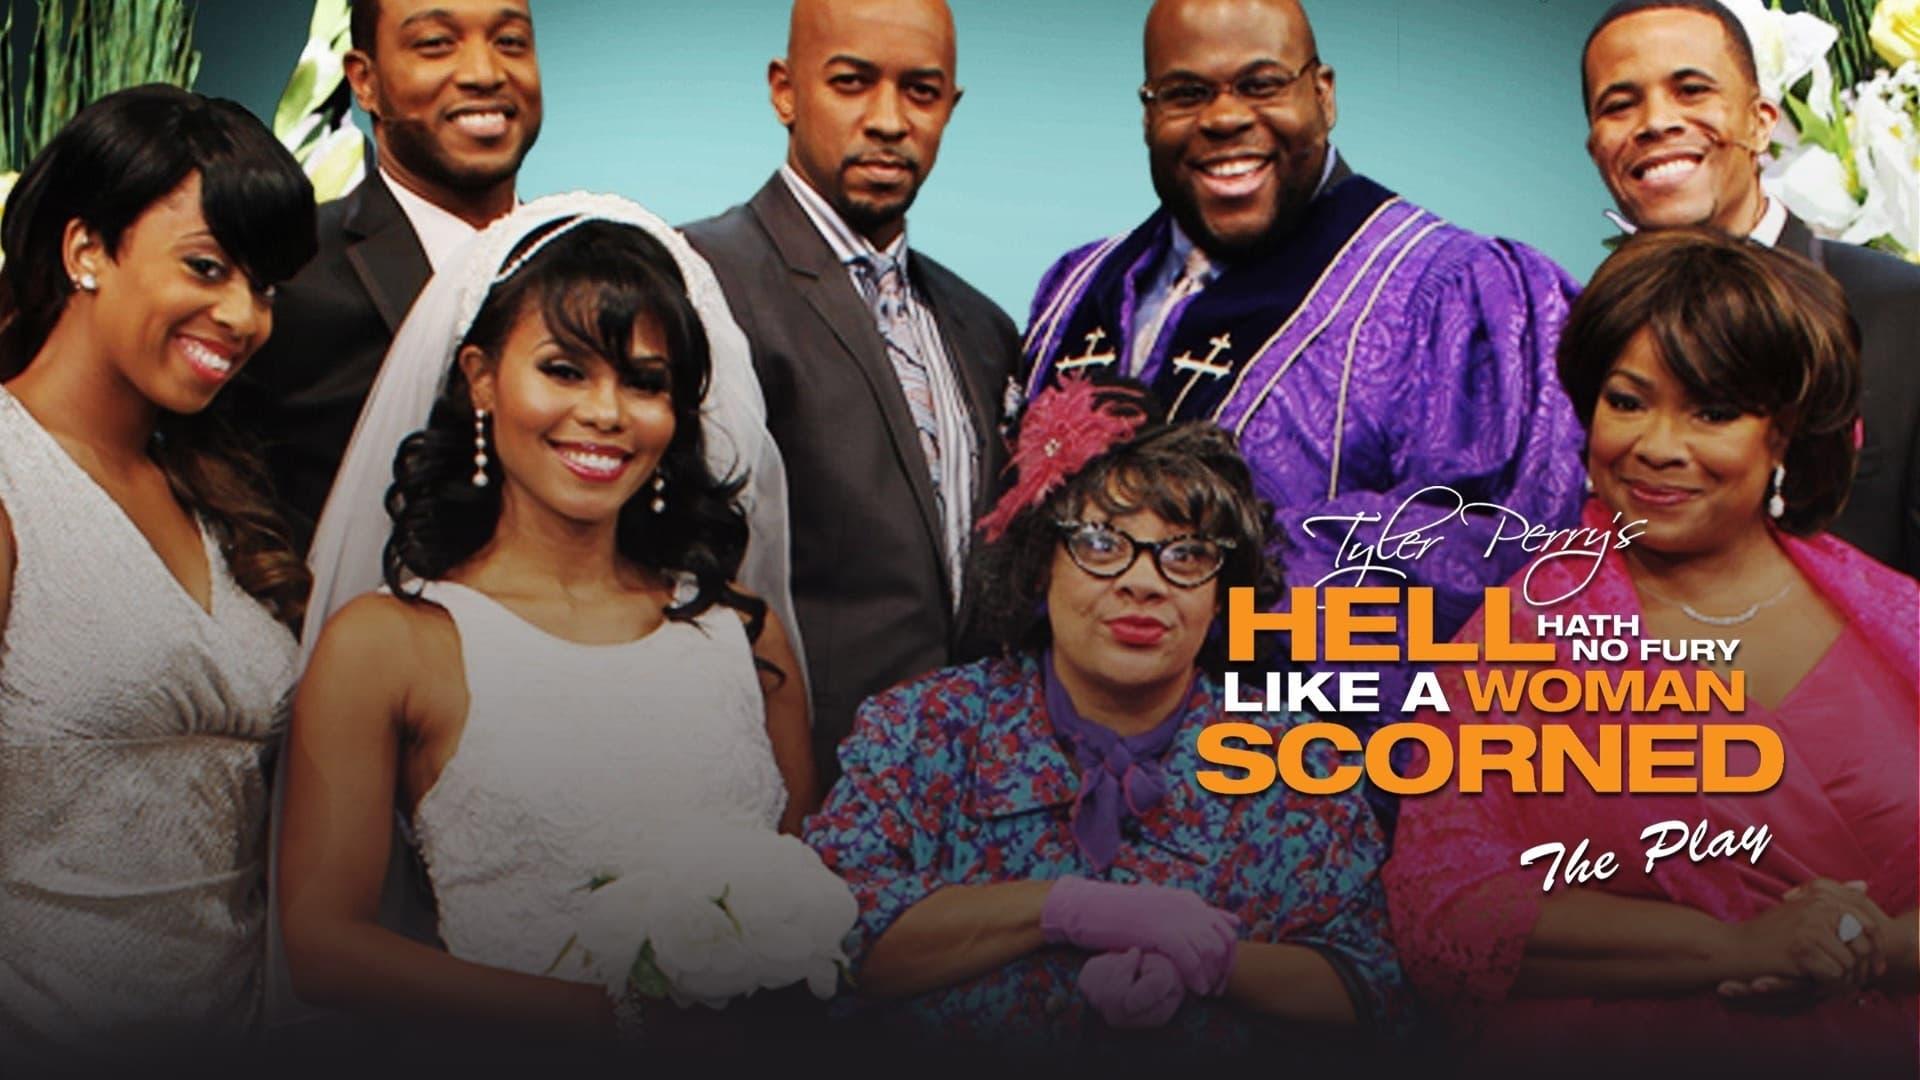 Tyler Perry's Hell Hath No Fury Like a Woman Scorned - The Play backdrop